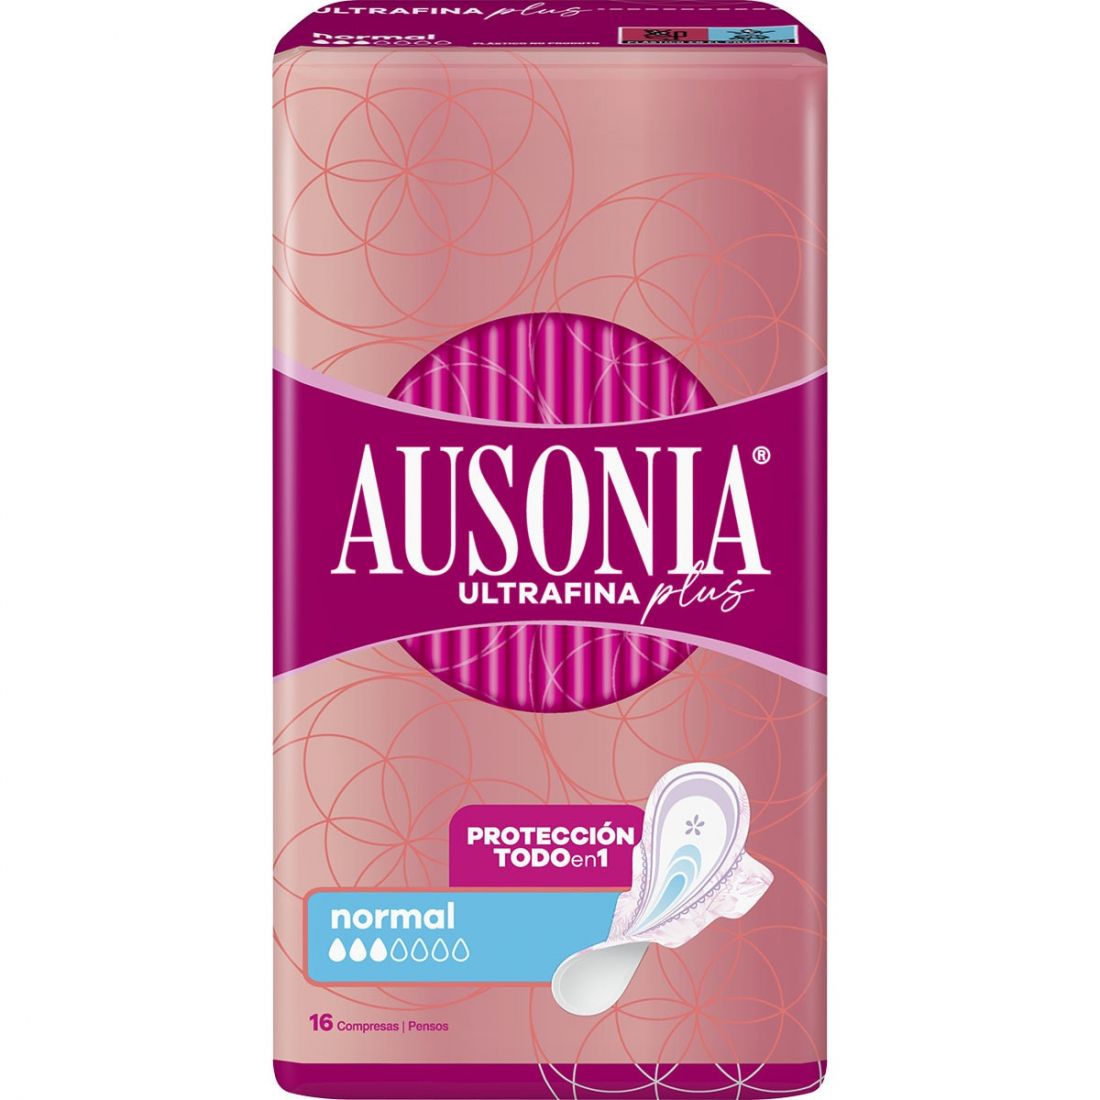 Ausonia - Compresse pour incontinence 'Ultrafine Plus Compress With Wings Protection All In 1' - Normal 16 Pièces